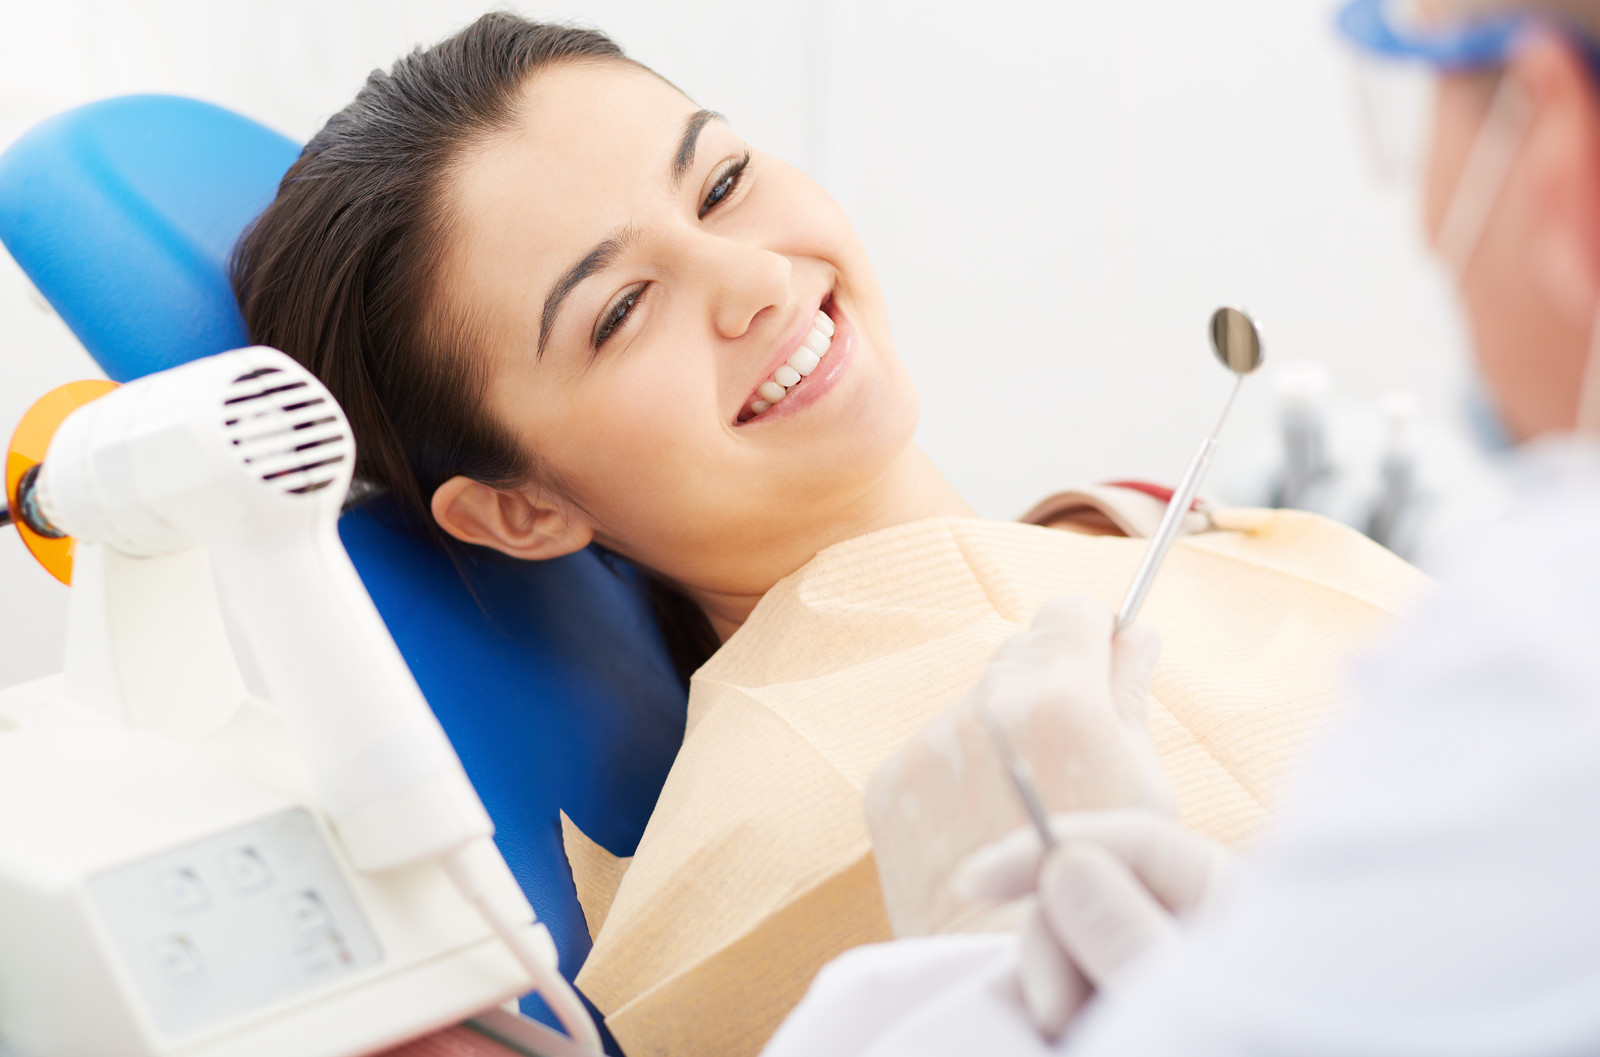 How to Make Your Dental Appointments More Comfortable and Enjoyable